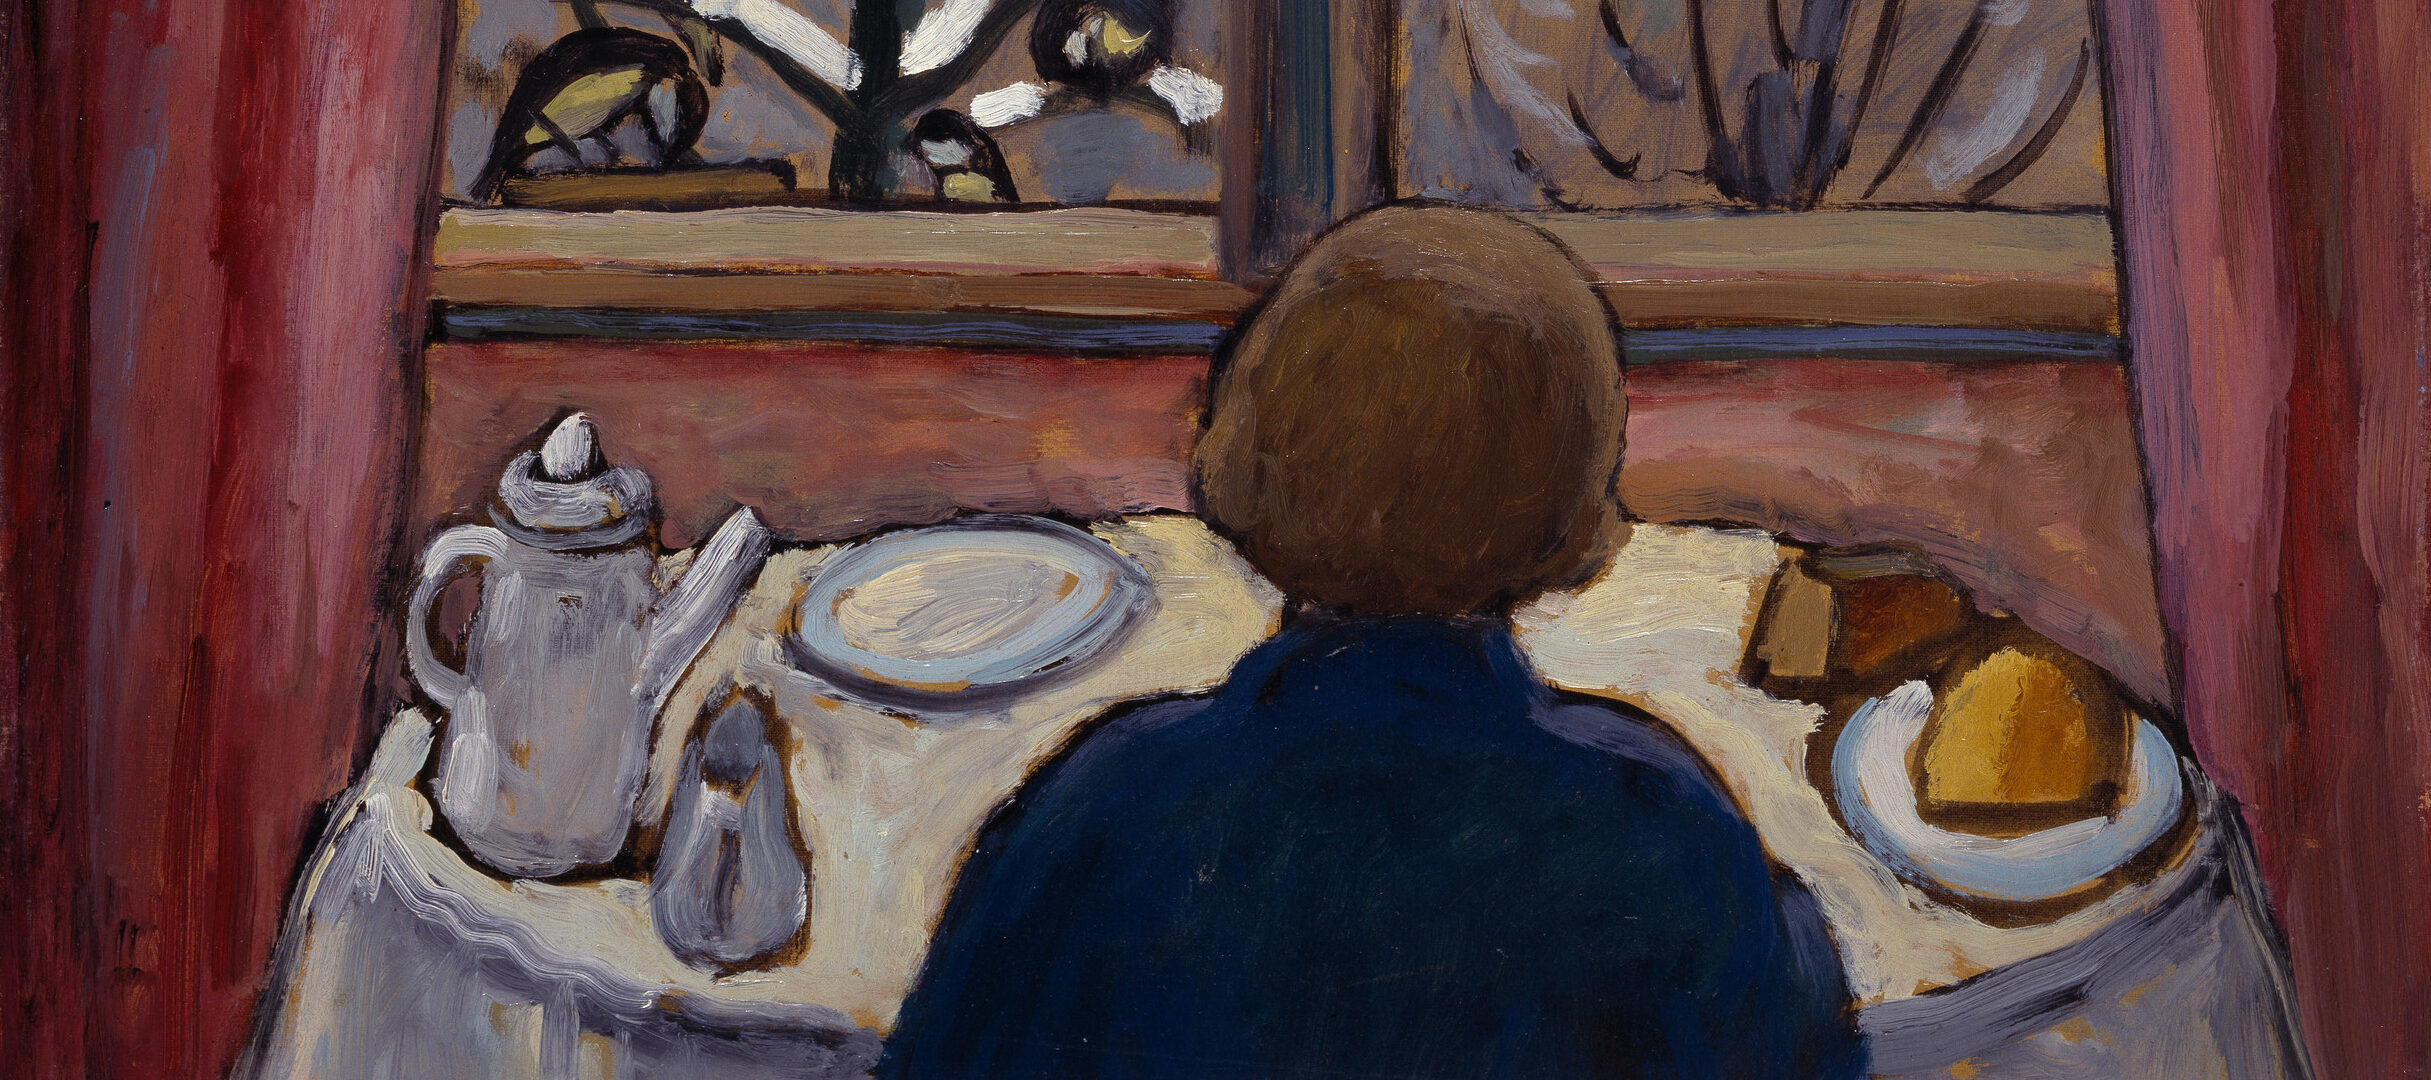 Using loose brushstrokes, a woman seated at a table in front of a window with her back to the viewer. The table is set with a teapot, creamer and plates with pasties. Outside the window is a winter scene with five birds perched upon the snow-covered branc